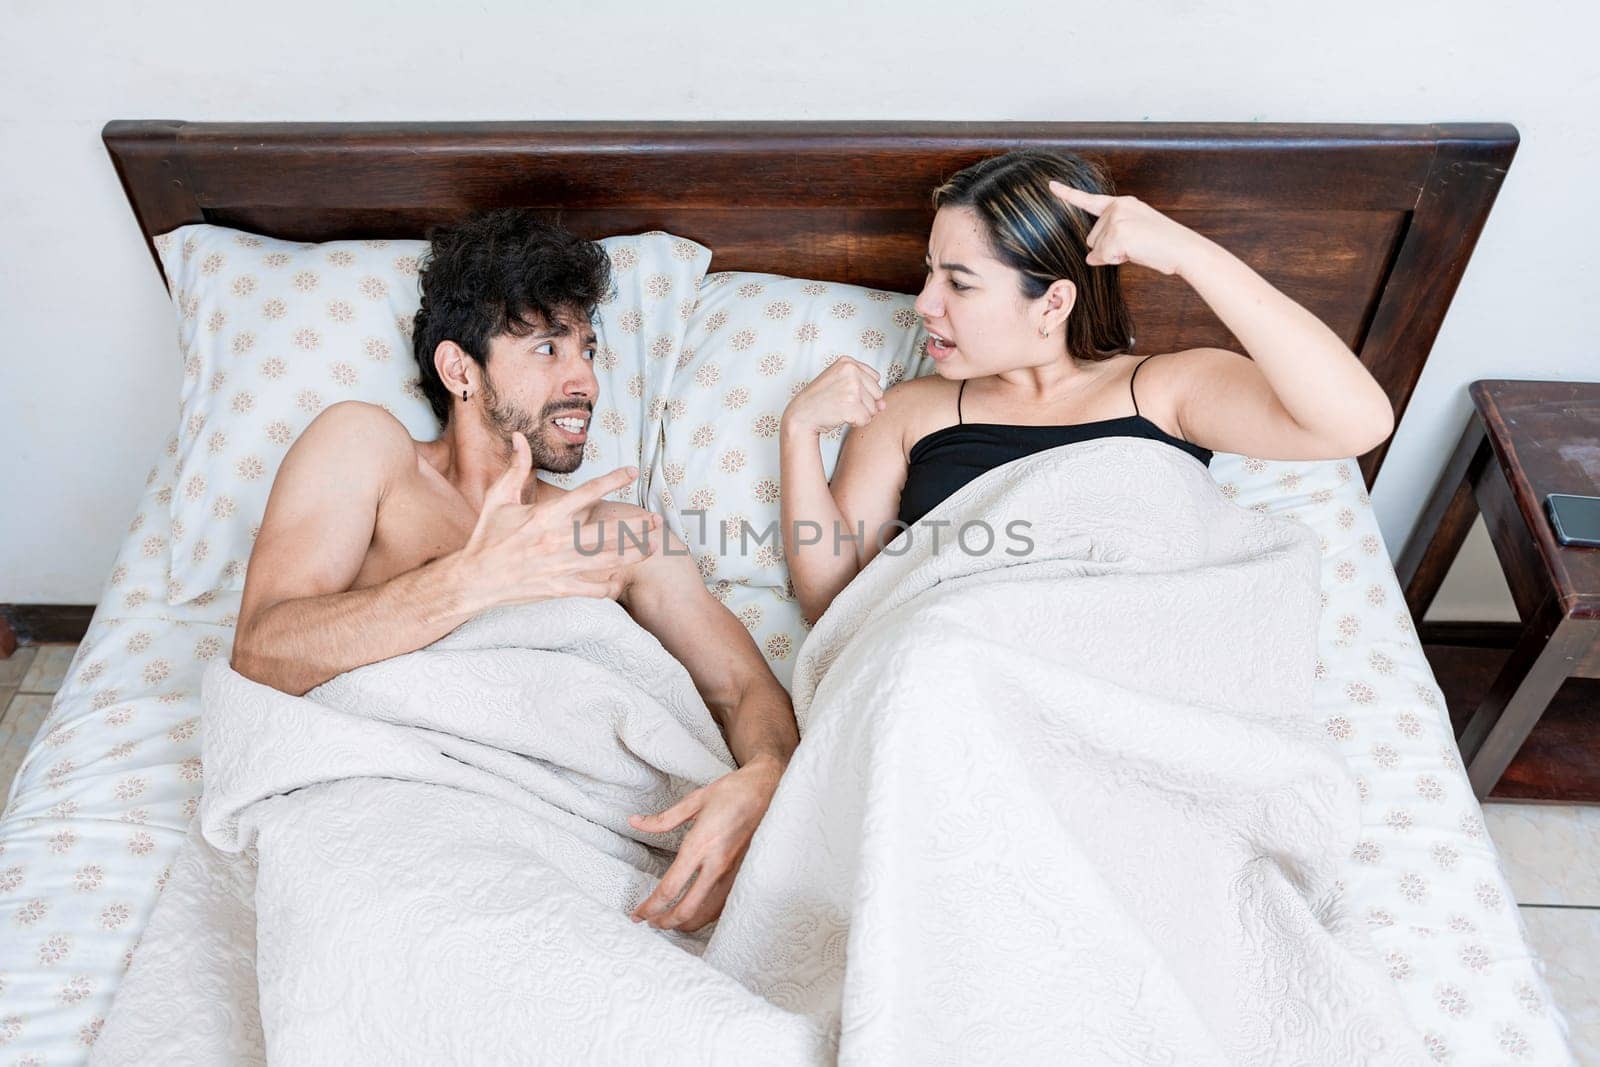 Upset couple lying in bed arguing. Top view of young couple lying in bed arguing. Upset couple lying in bed arguing. Marriage problems concept